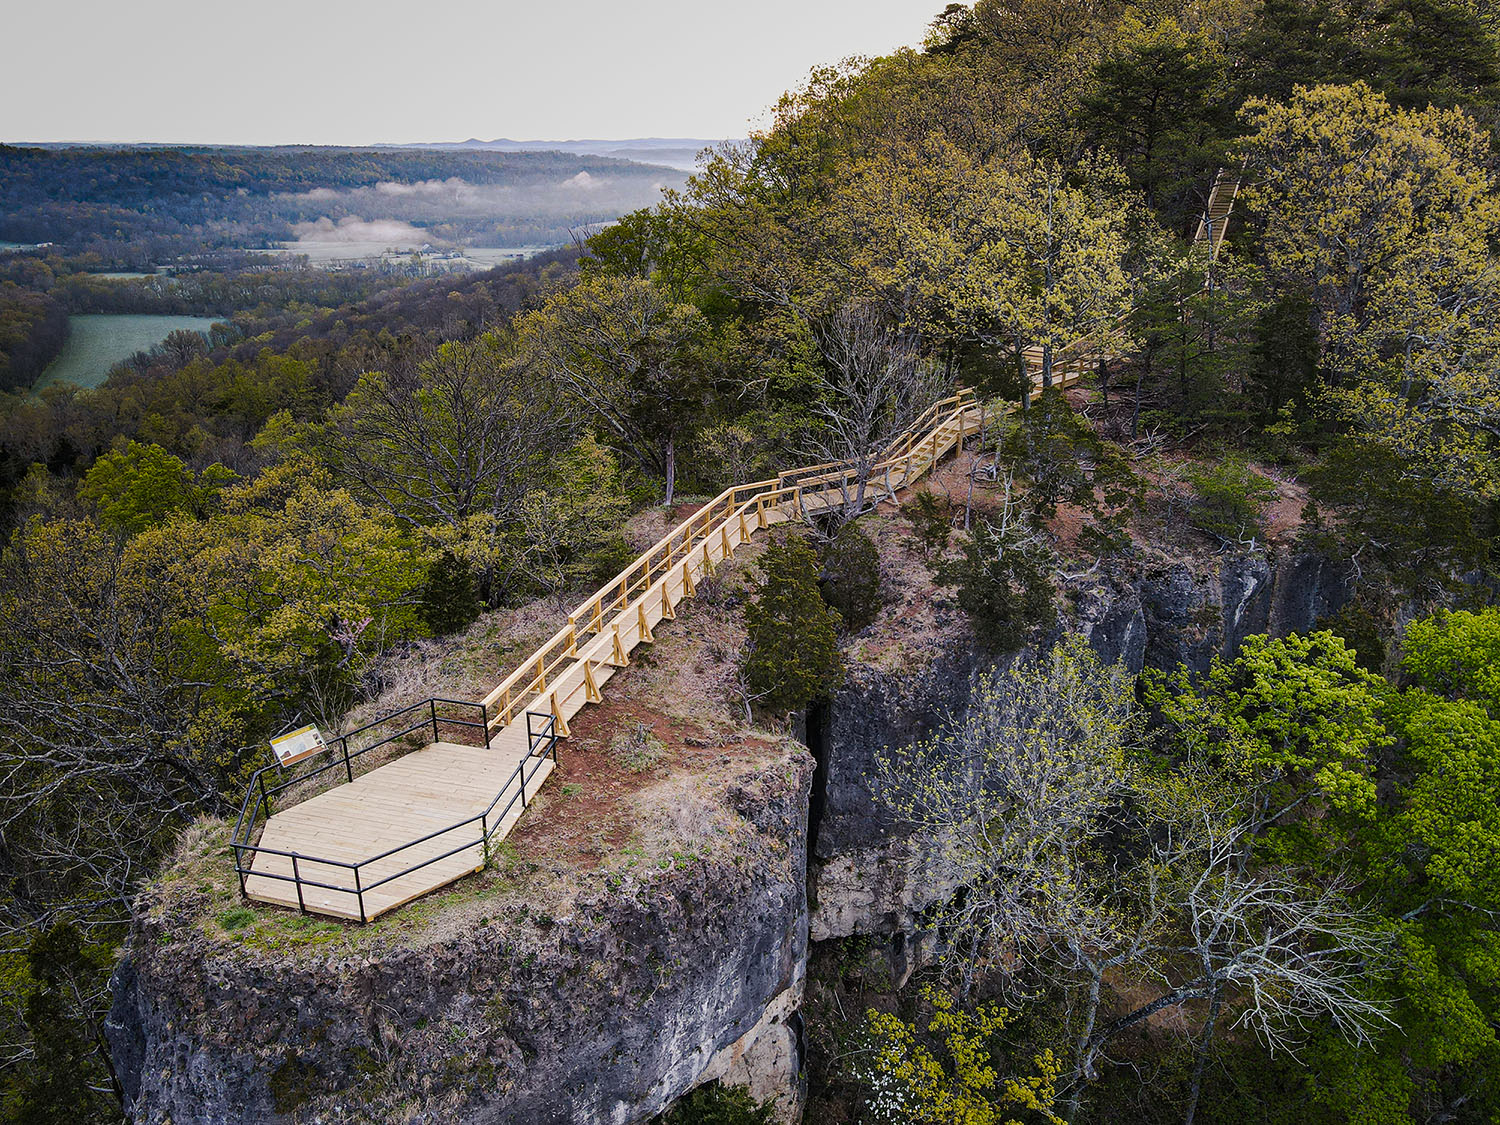 An aerial view of a wooden viewing deck on a forested rocky outcrop.